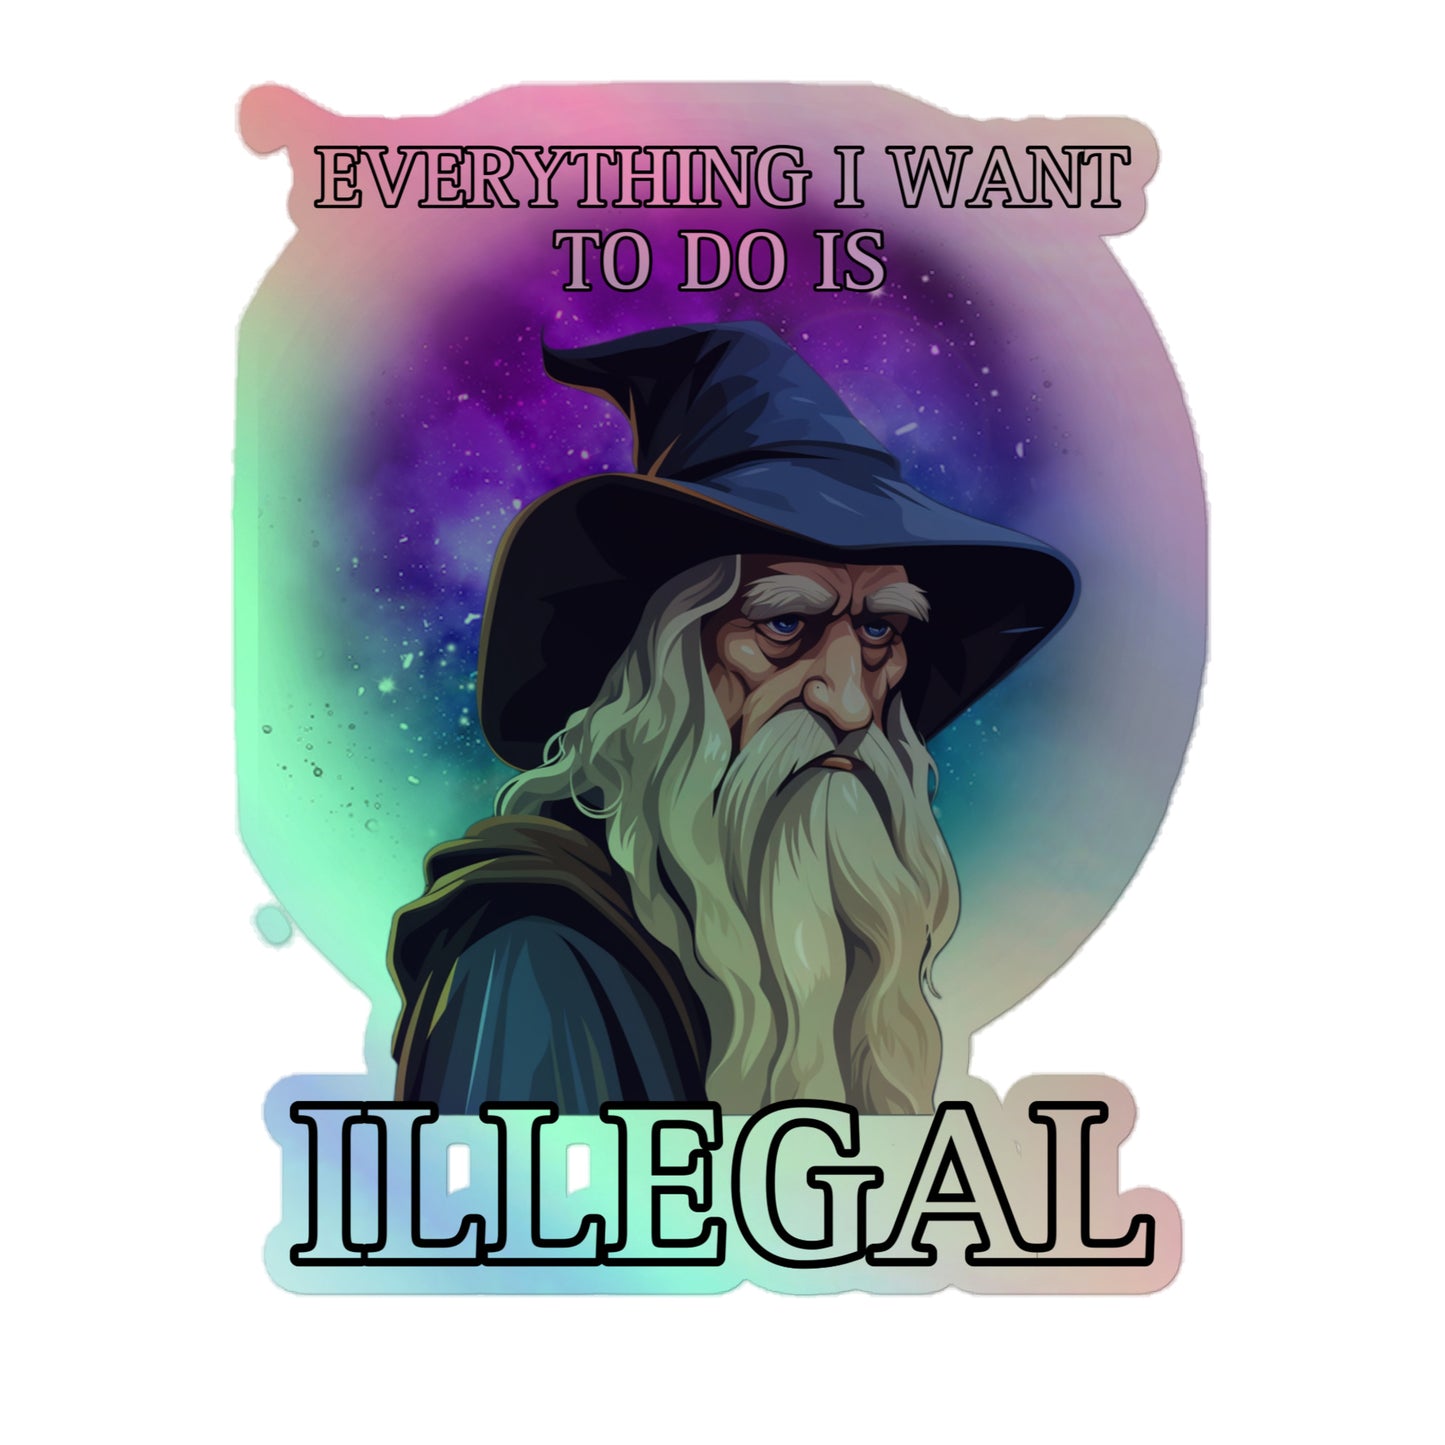 Everything I want to do is illegal (sticker)